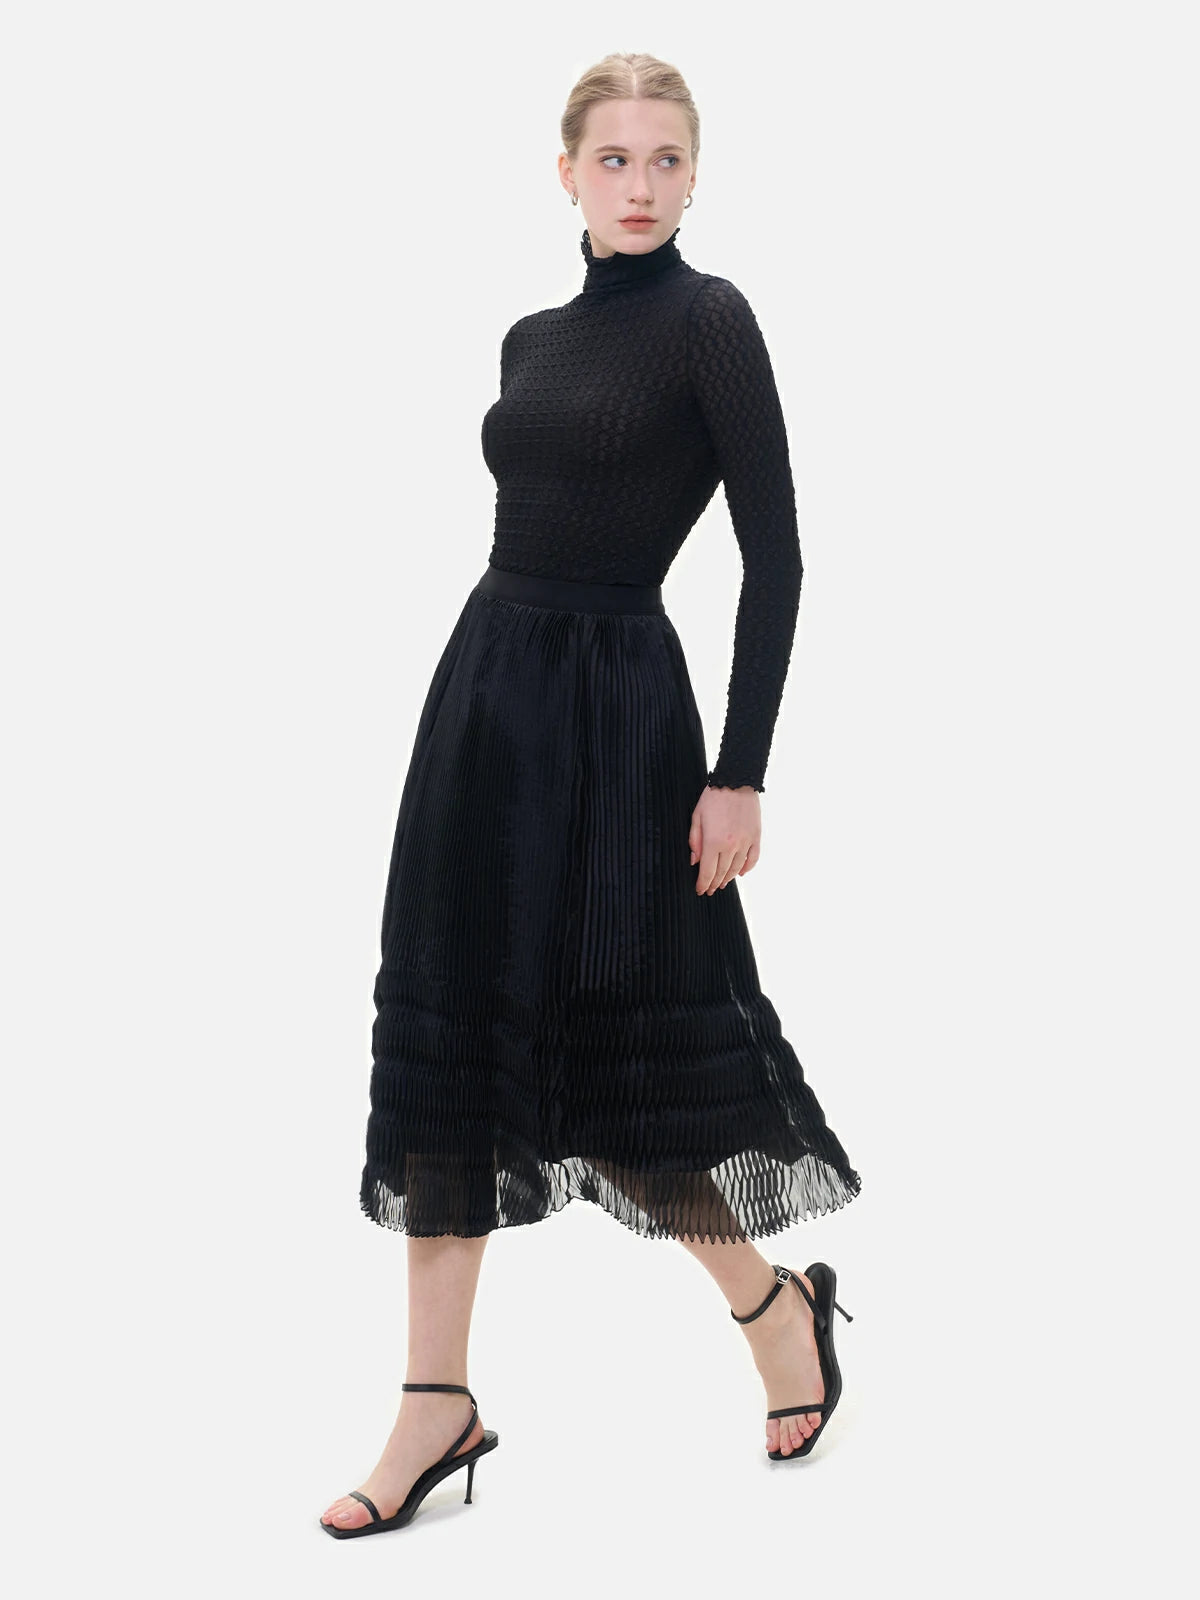 An elegant and stylish black semi-transparent skirt with V-shaped pleats, perfectly showcasing the charm of women.